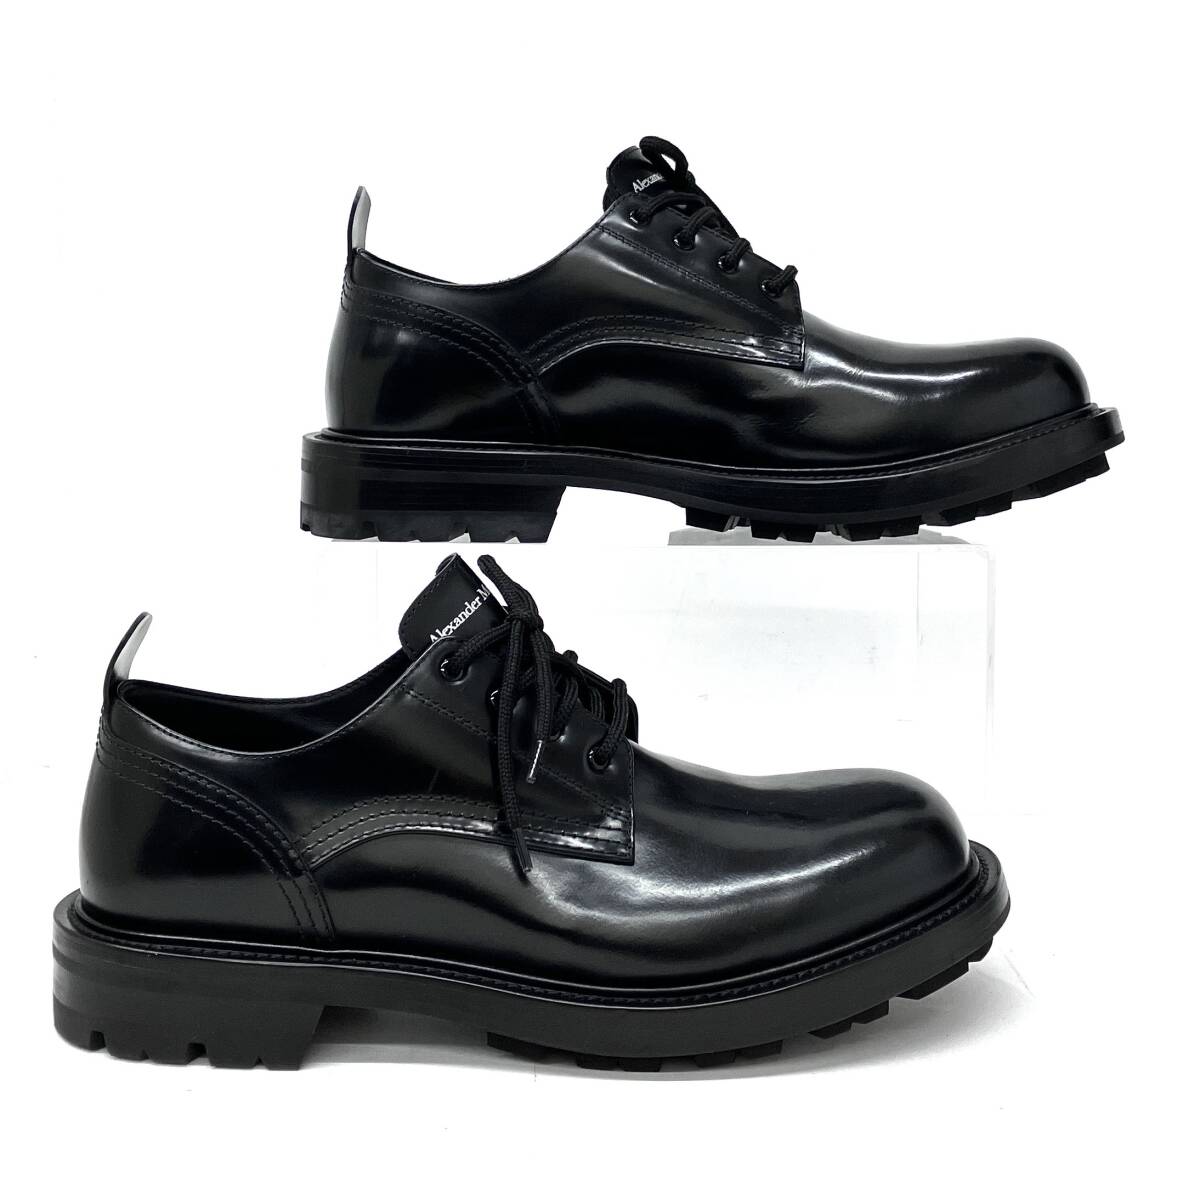 Alexander McQueen Alexander McQueen dress shoes leather shoes thickness bottom imported car brand MADE IN ITALY size 43